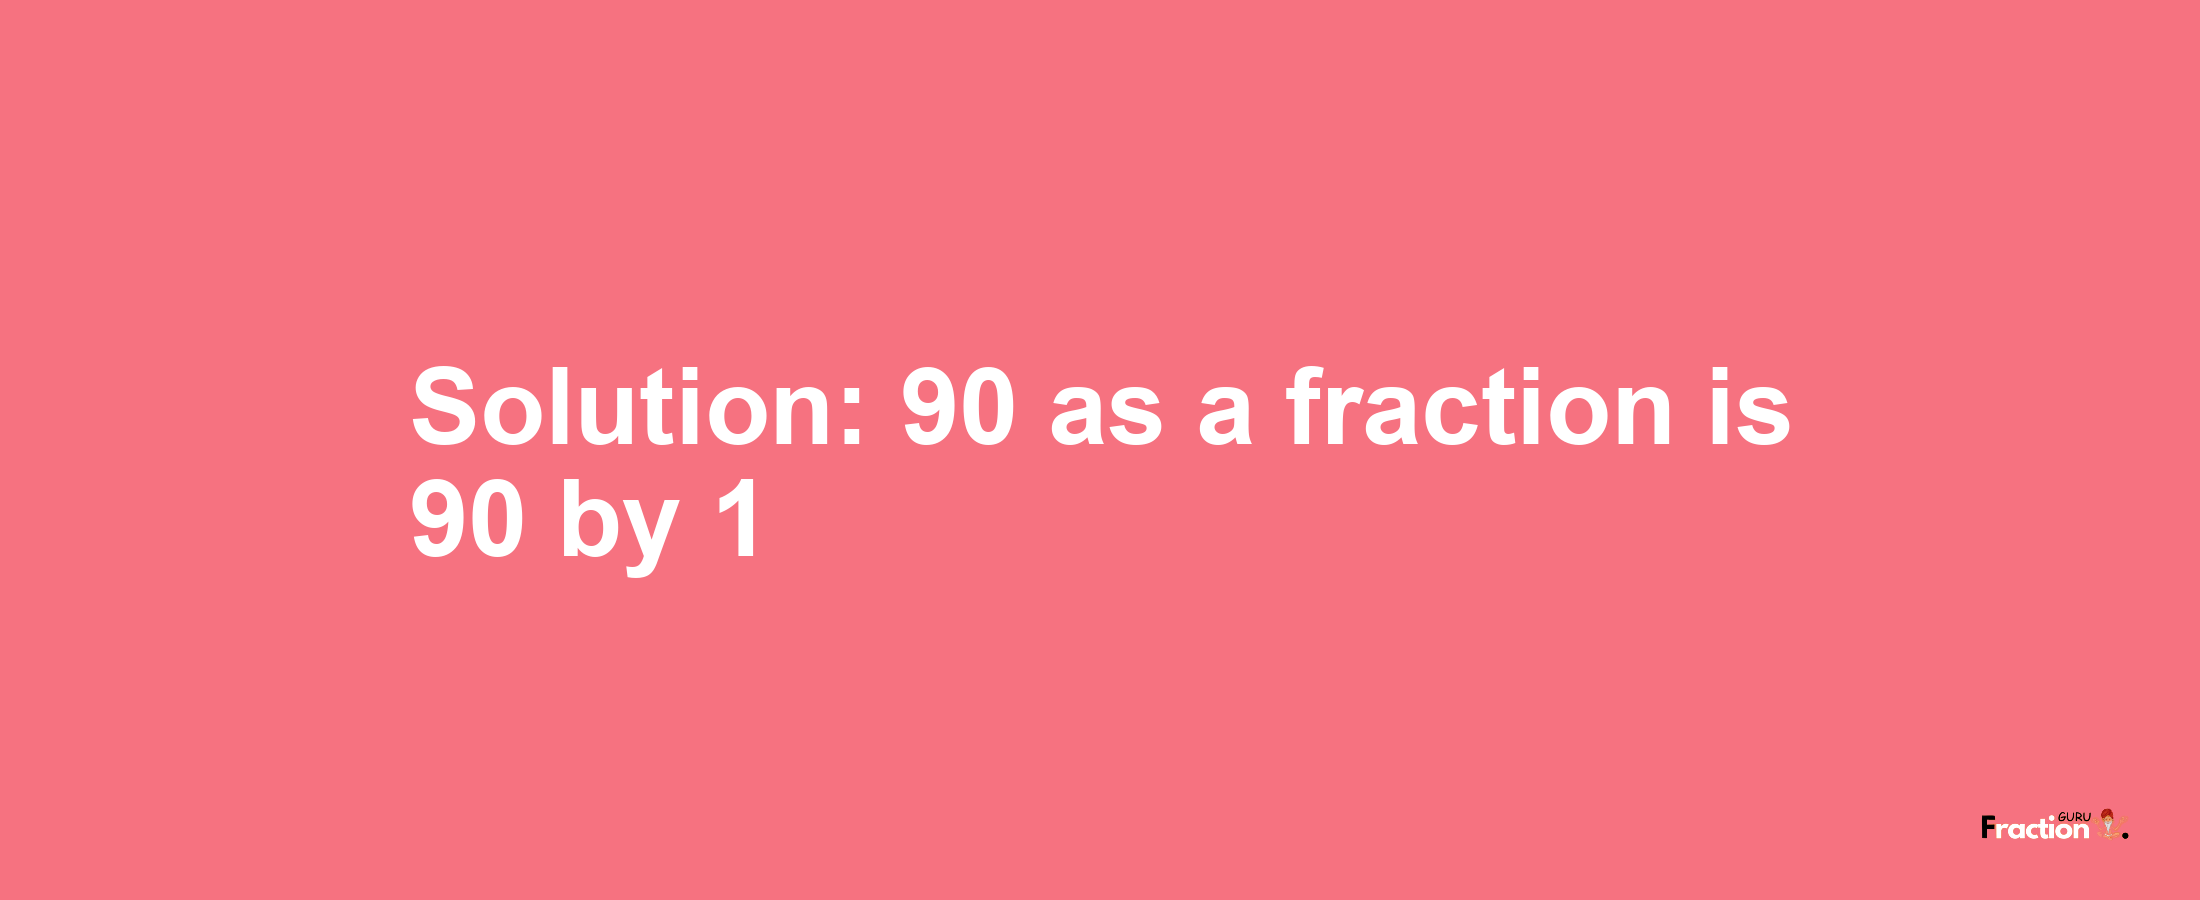 Solution:90 as a fraction is 90/1